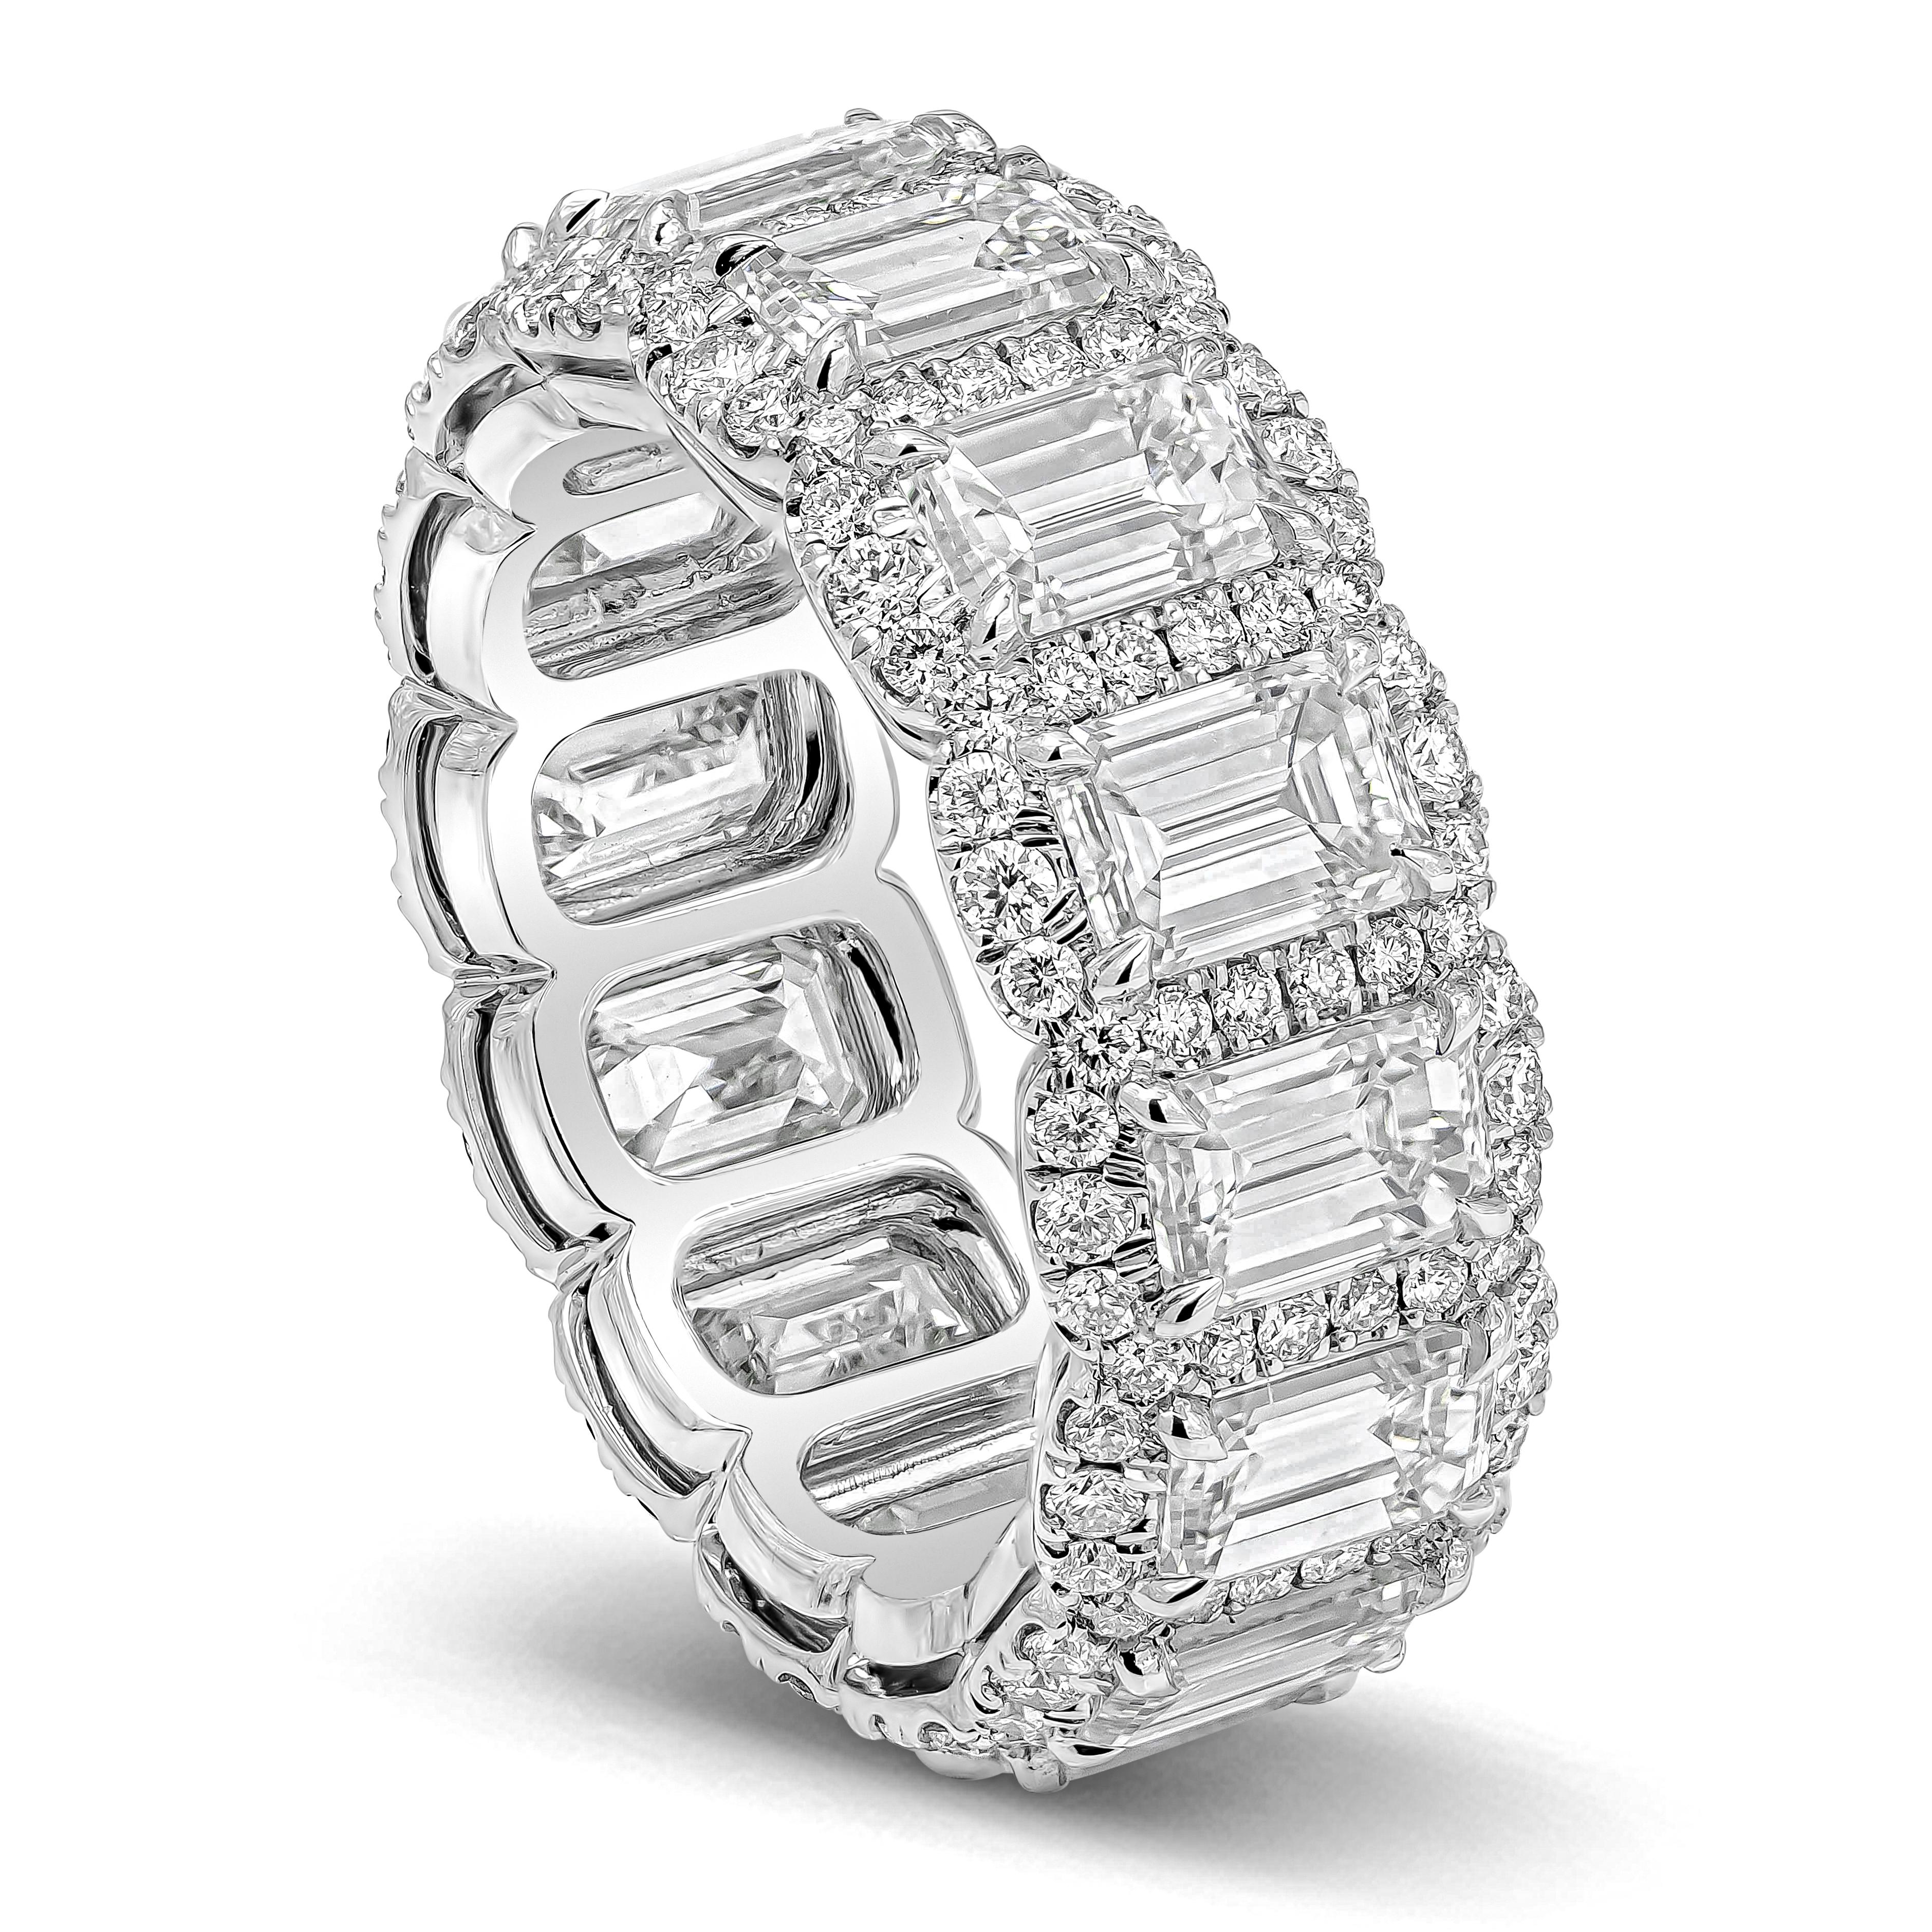 A beautiful and unique eternity wedding band, showcasing a row of emerald cut diamonds weighing 5.73 carats total with F color and VS clarity. Surrounded by a row of round brilliant diamonds weighing 0.94 carats total. Made with platinum. Size 6 US,